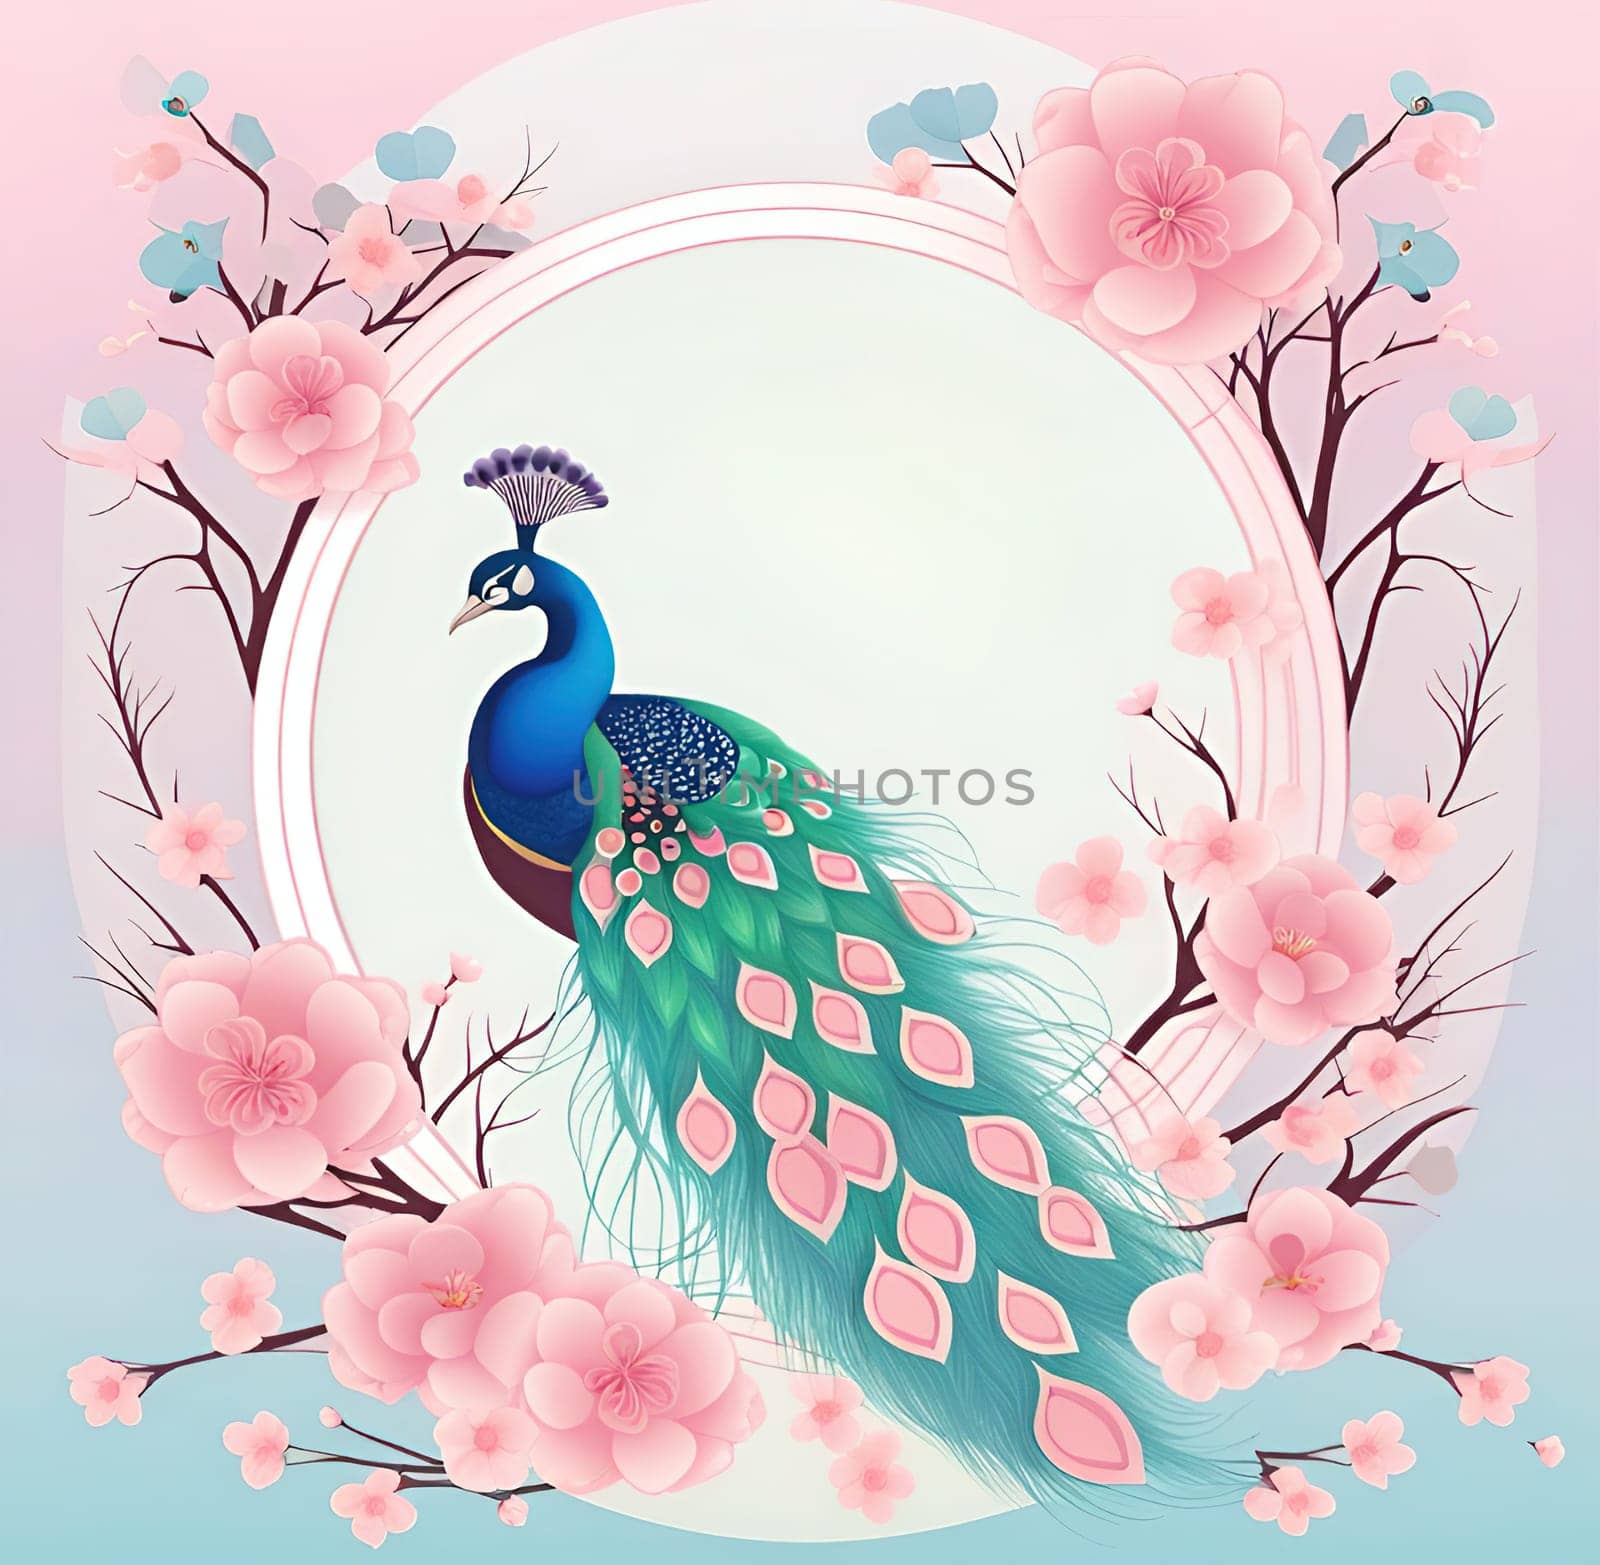 Peacock and cherry blossom background vector illustration. spring season